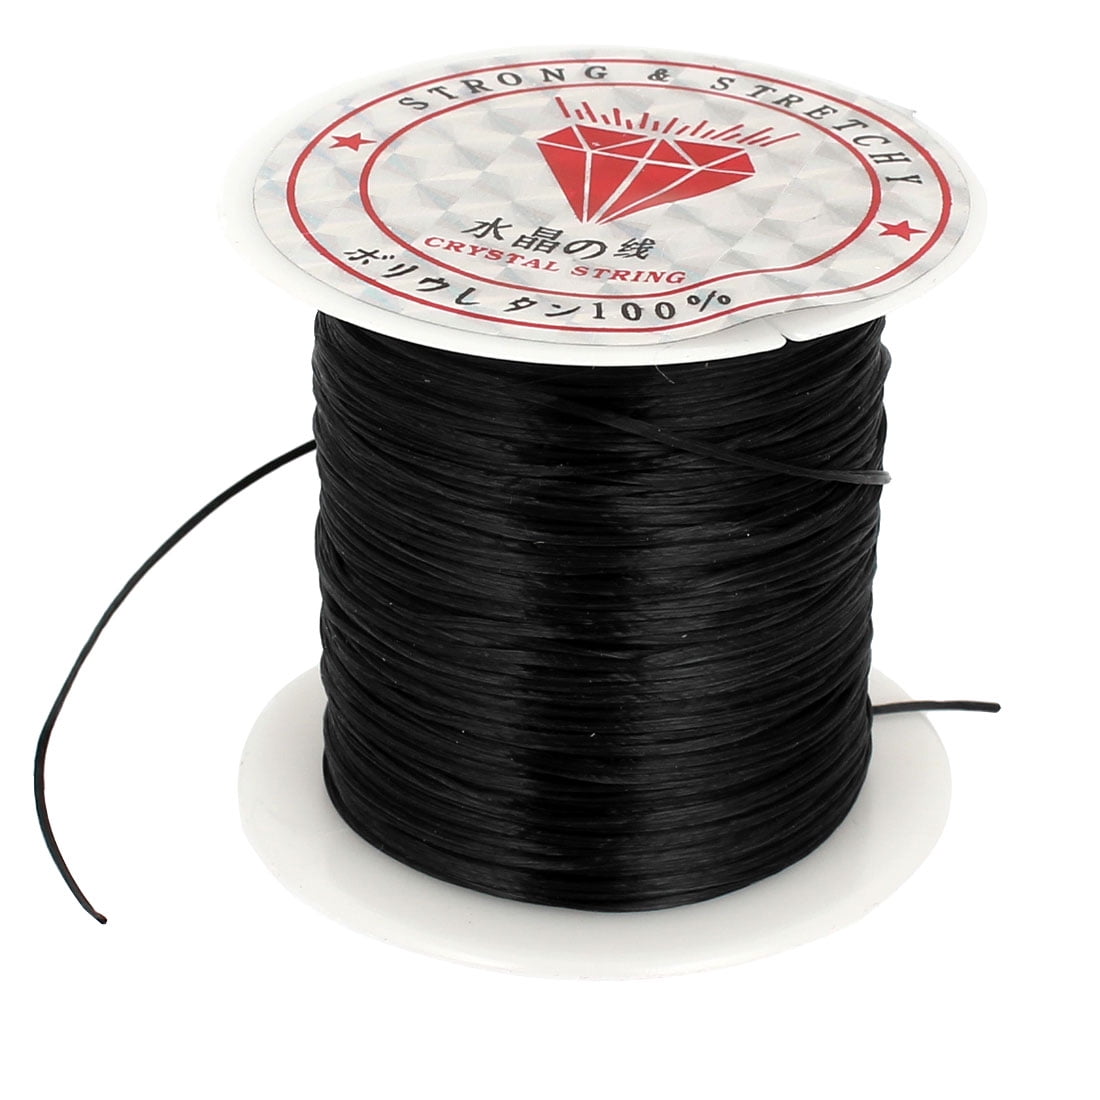 25-100M Strong Elastic Stretchy Beading Thread Cord Bracelet String 0.5-1.0MM